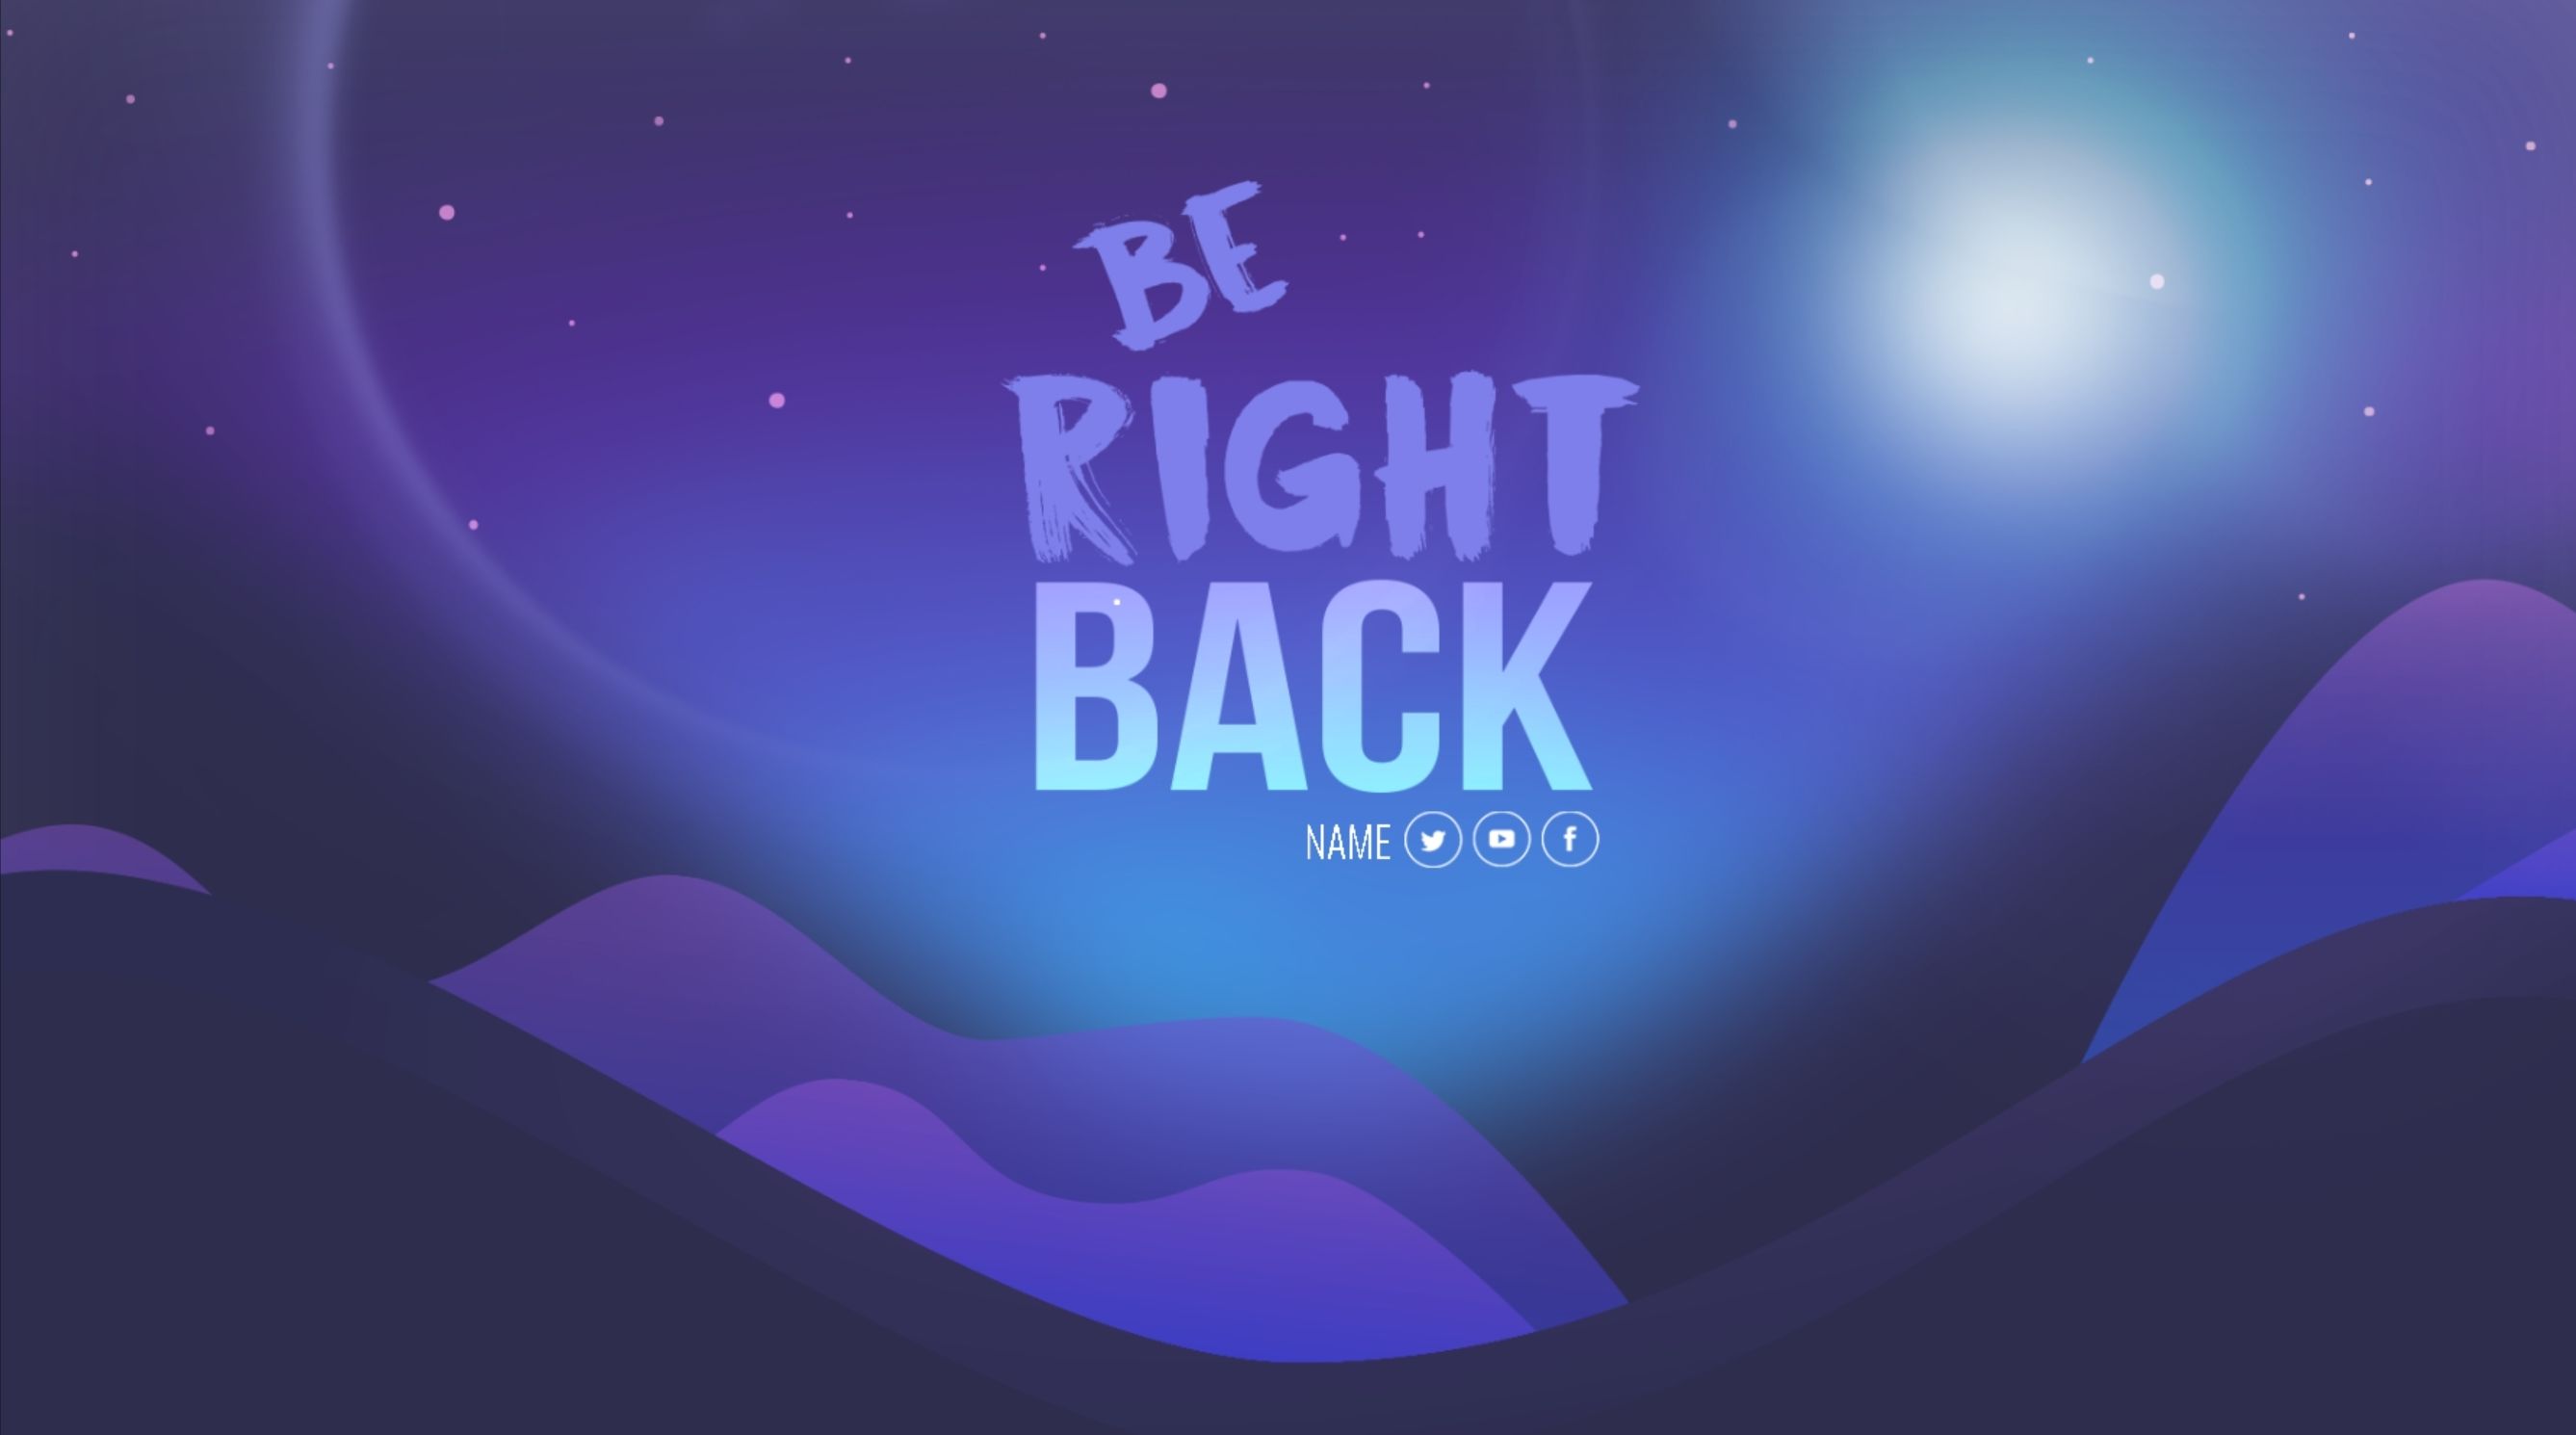 Library Streamlabs Twitch Be Right Back Graphic Design Art